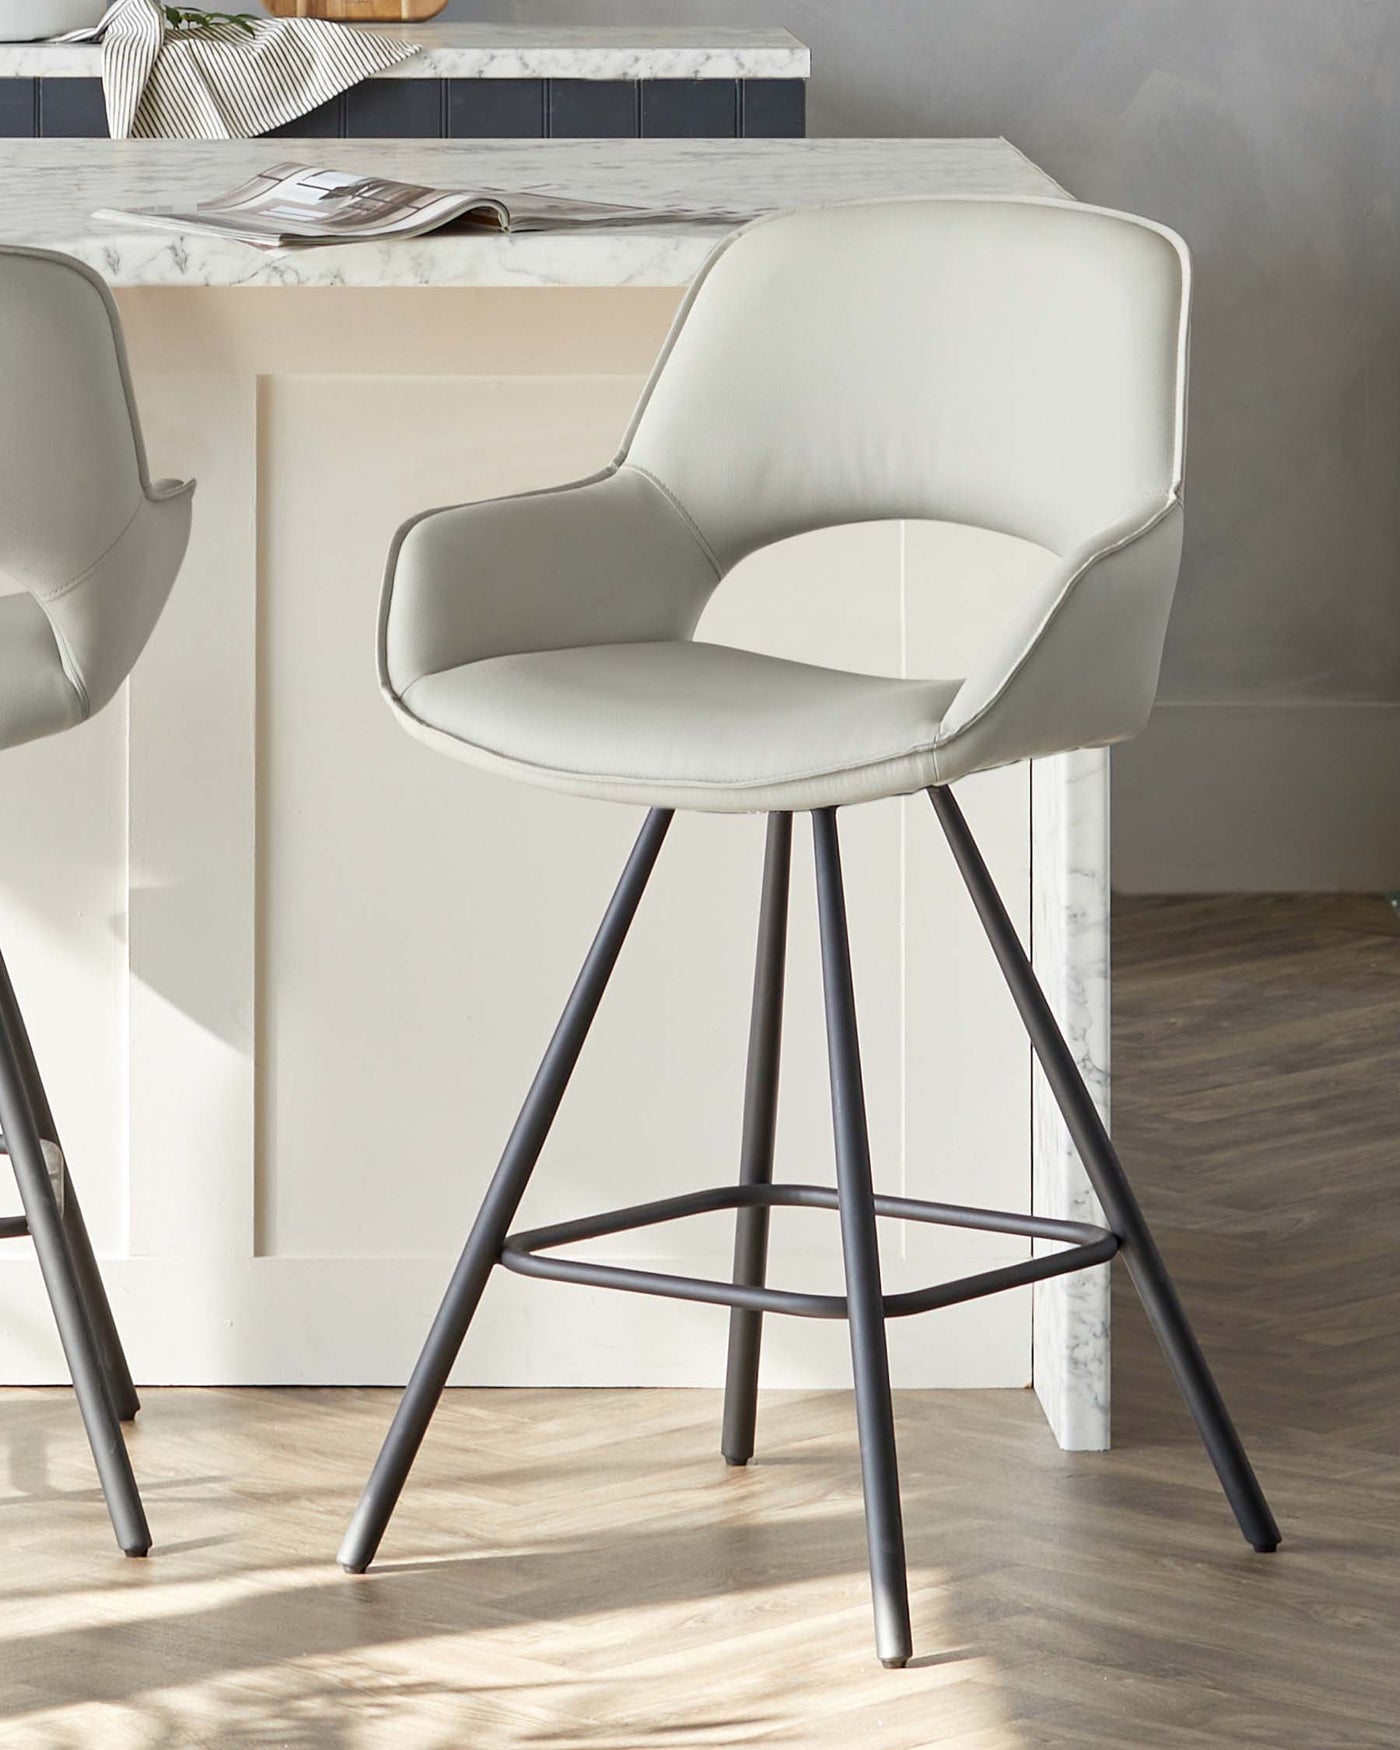 Modern light grey upholstered bar stool with a sweeping curved backrest and a comfortable, rounded seat pad, mounted on a sleek black metal frame with four slender legs and a circular footrest. The stool is positioned near a kitchen island with a white marble countertop.